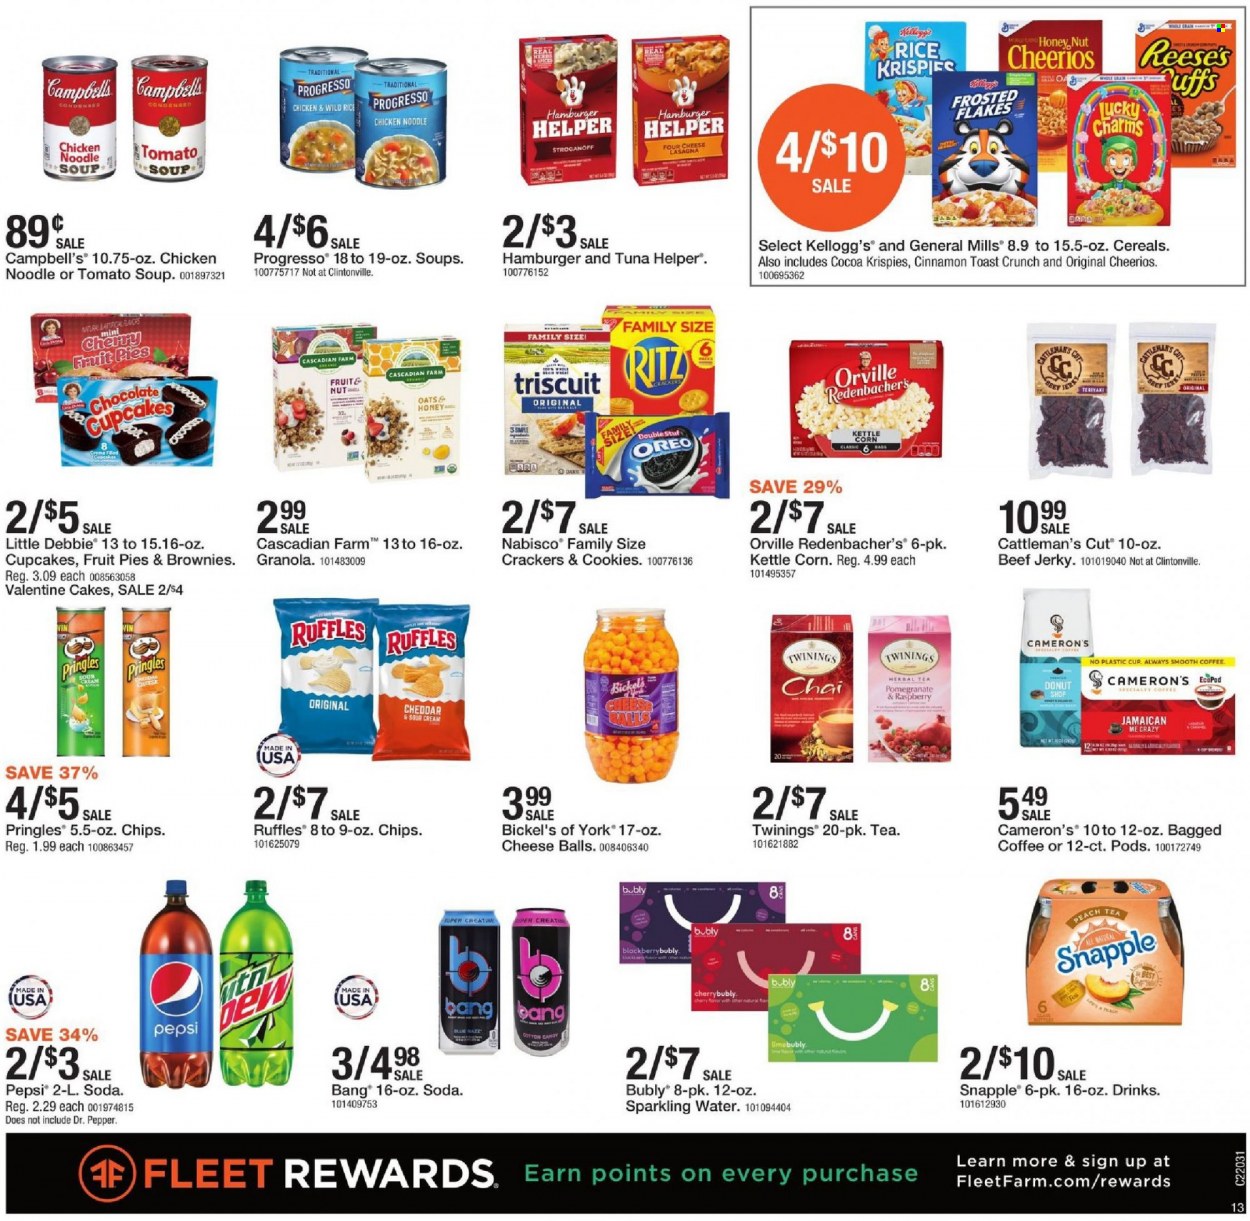 thumbnail - Fleet Farm Flyer - 01/14/2022 - 01/22/2022 - Sales products - cake, cupcake, brownies, cookies, Oreo, crackers, Kellogg's, Reese's, kettle corn, Pringles, chips, Ruffles, cocoa, oats, tuna, soup, Progresso, cereals, granola, Cheerios, Rice Krispies, Frosted Flakes, noodles, cinnamon, Campbell's, Pepsi, Dr. Pepper, Snapple, soda, sparkling water, tea, herbal tea, Twinings, bagged coffee, cup. Page 13.